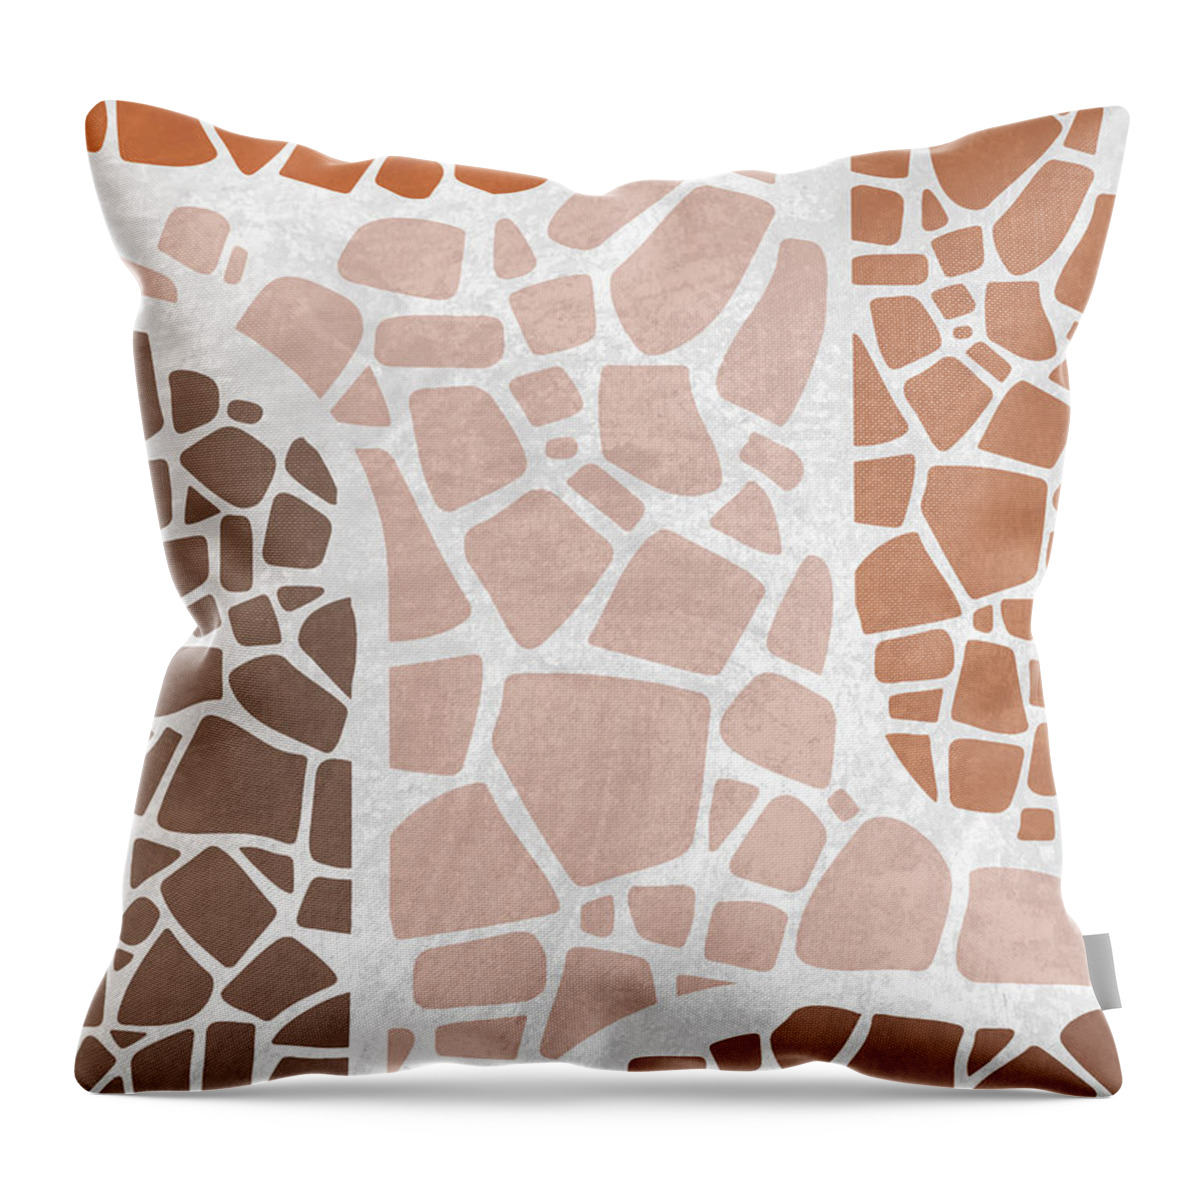 Mosaic Throw Pillow featuring the mixed media Brown Mosaic Art Print - Modern, Contemporary Abstract by Studio Grafiikka